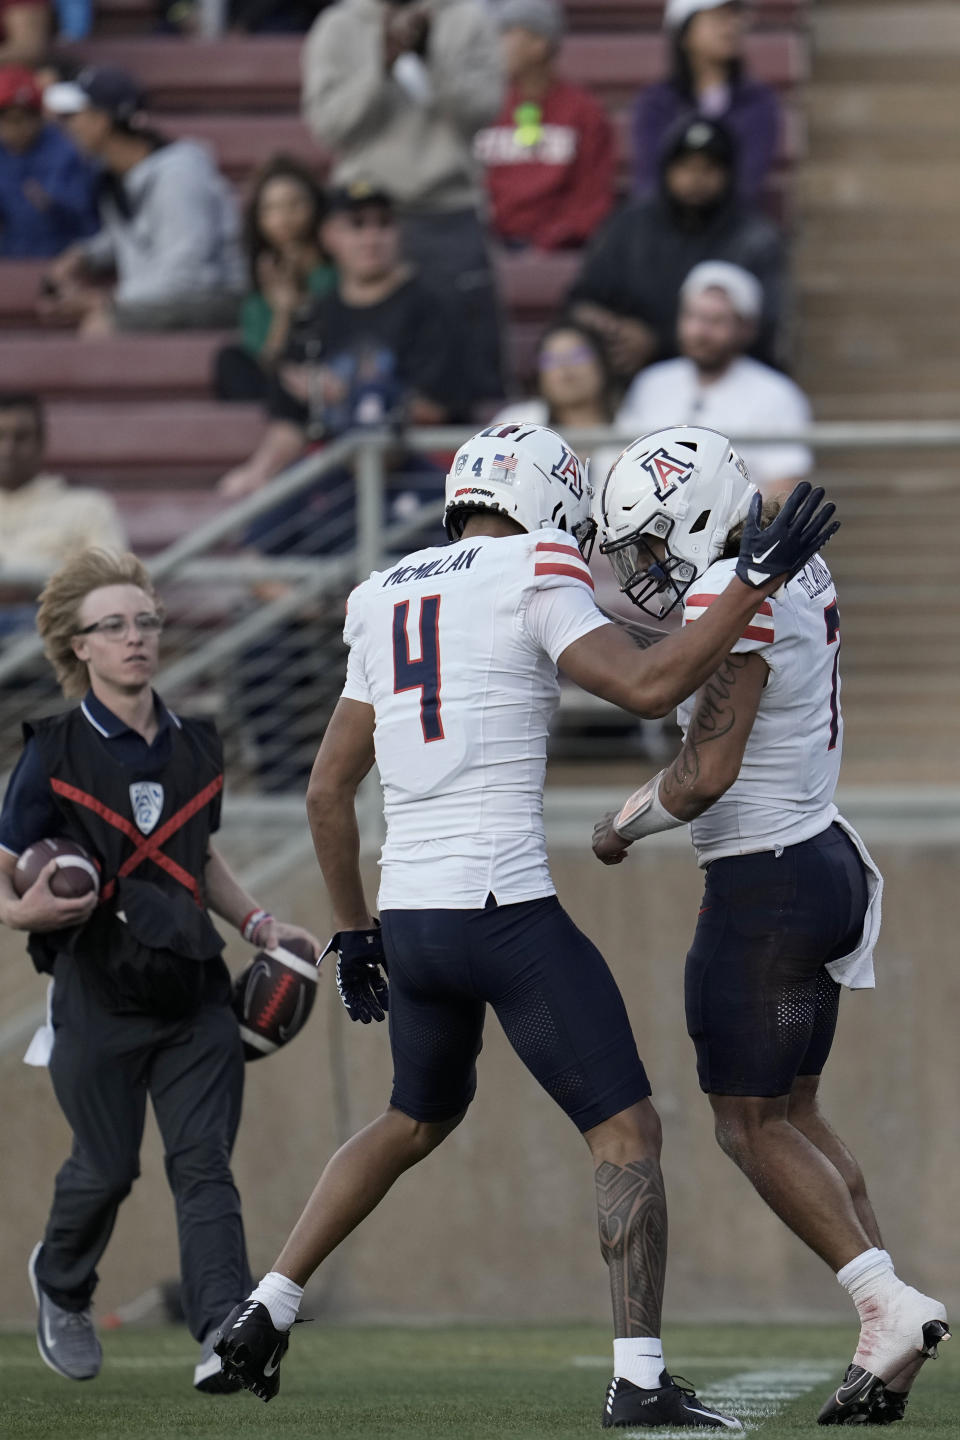 Arizona quarterback Jayden de Laura, right, celebrates with wide receiver Tetairoa McMillan (4) after scoring a rushing touchdown against Stanford during the second half of an NCAA college football game Saturday, Sept. 23, 2023, in Stanford, Calif. (AP Photo/Godofredo A. Vásquez)